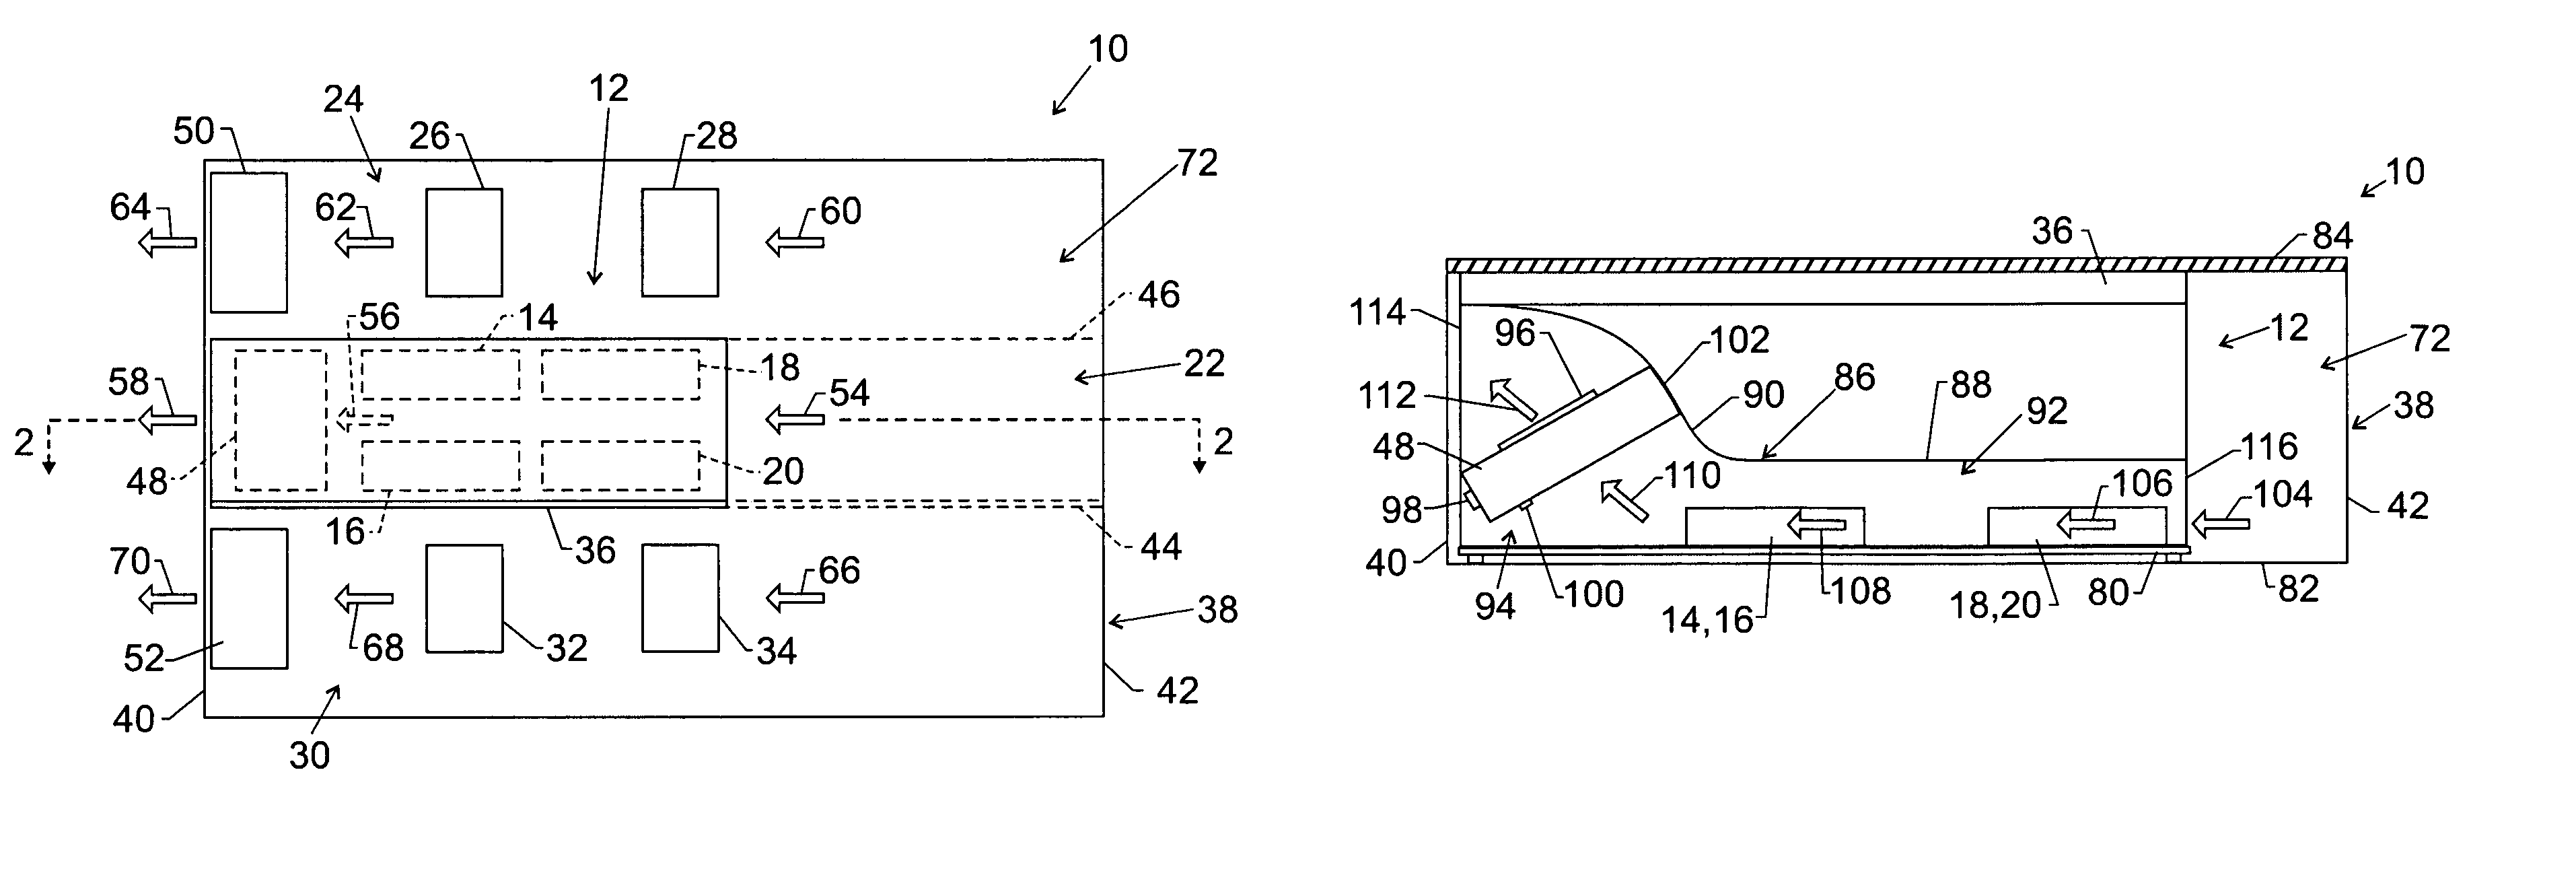 System and method for cooling components in an electronic device